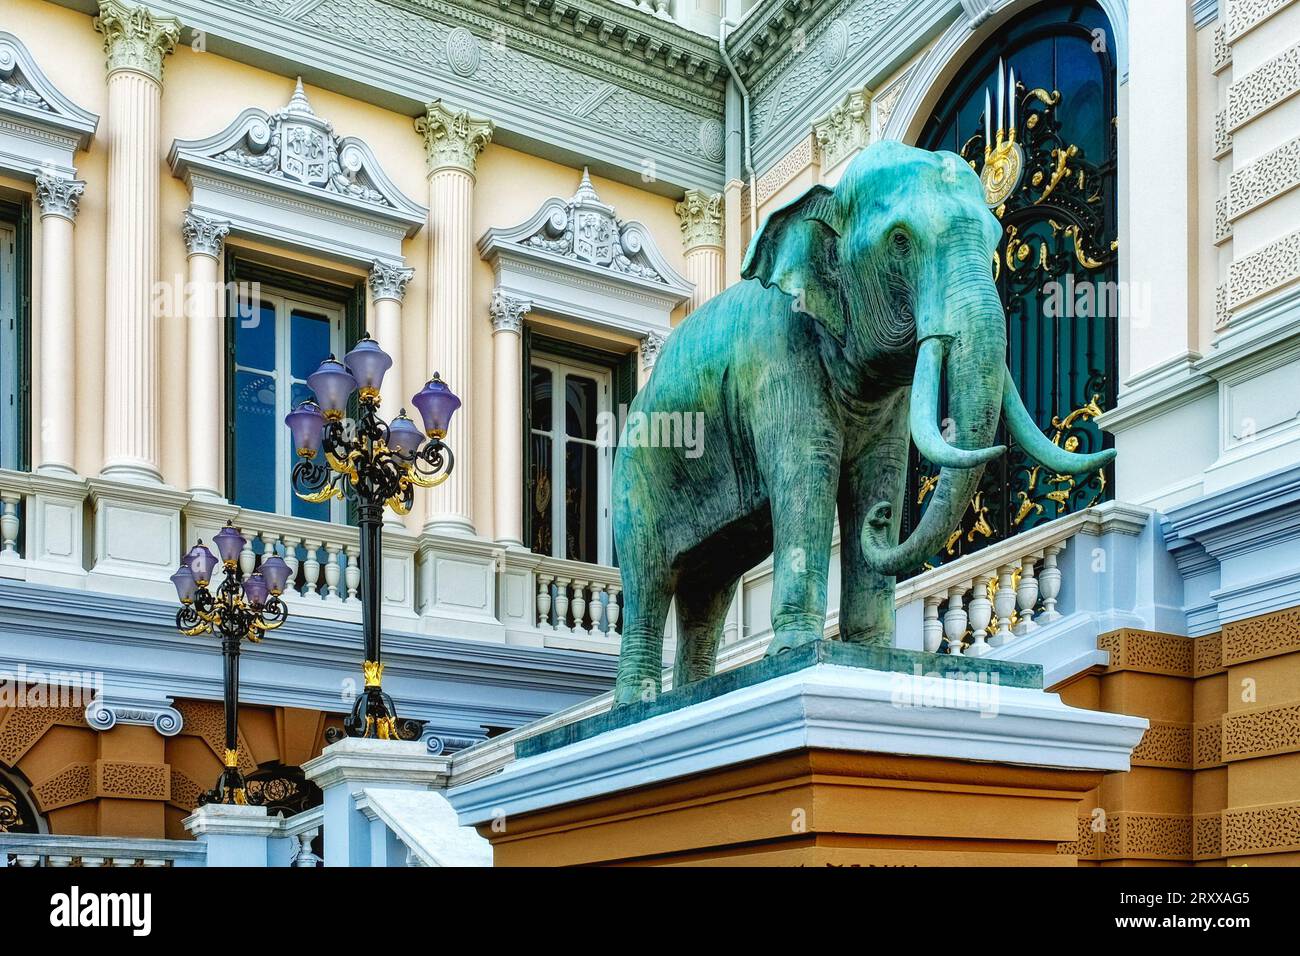 Dominating the scene is a grand elephant sculpture positioned atop a finely detailed pedestal, set before an exquisitely adorned architectural masterp Stock Photo